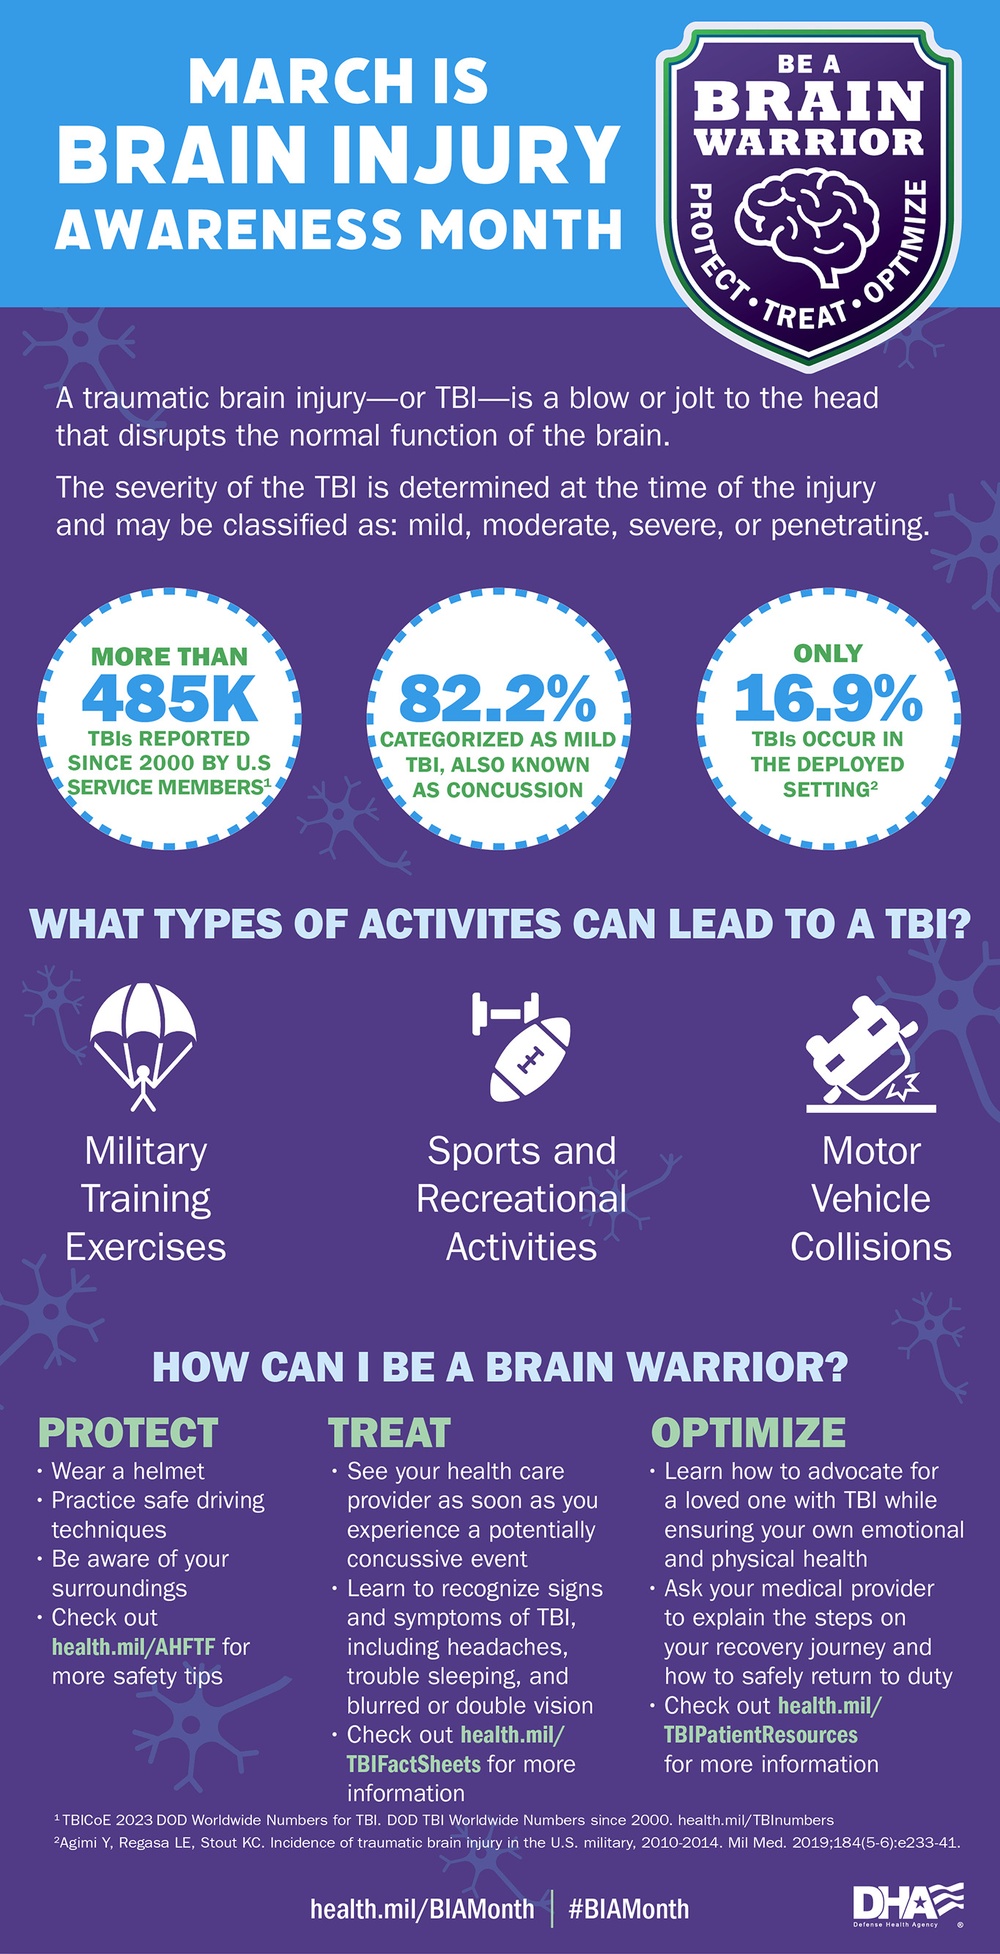 Walter Reed and NICoE Partner to Create Better Outcomes for Brain Injured Warriors